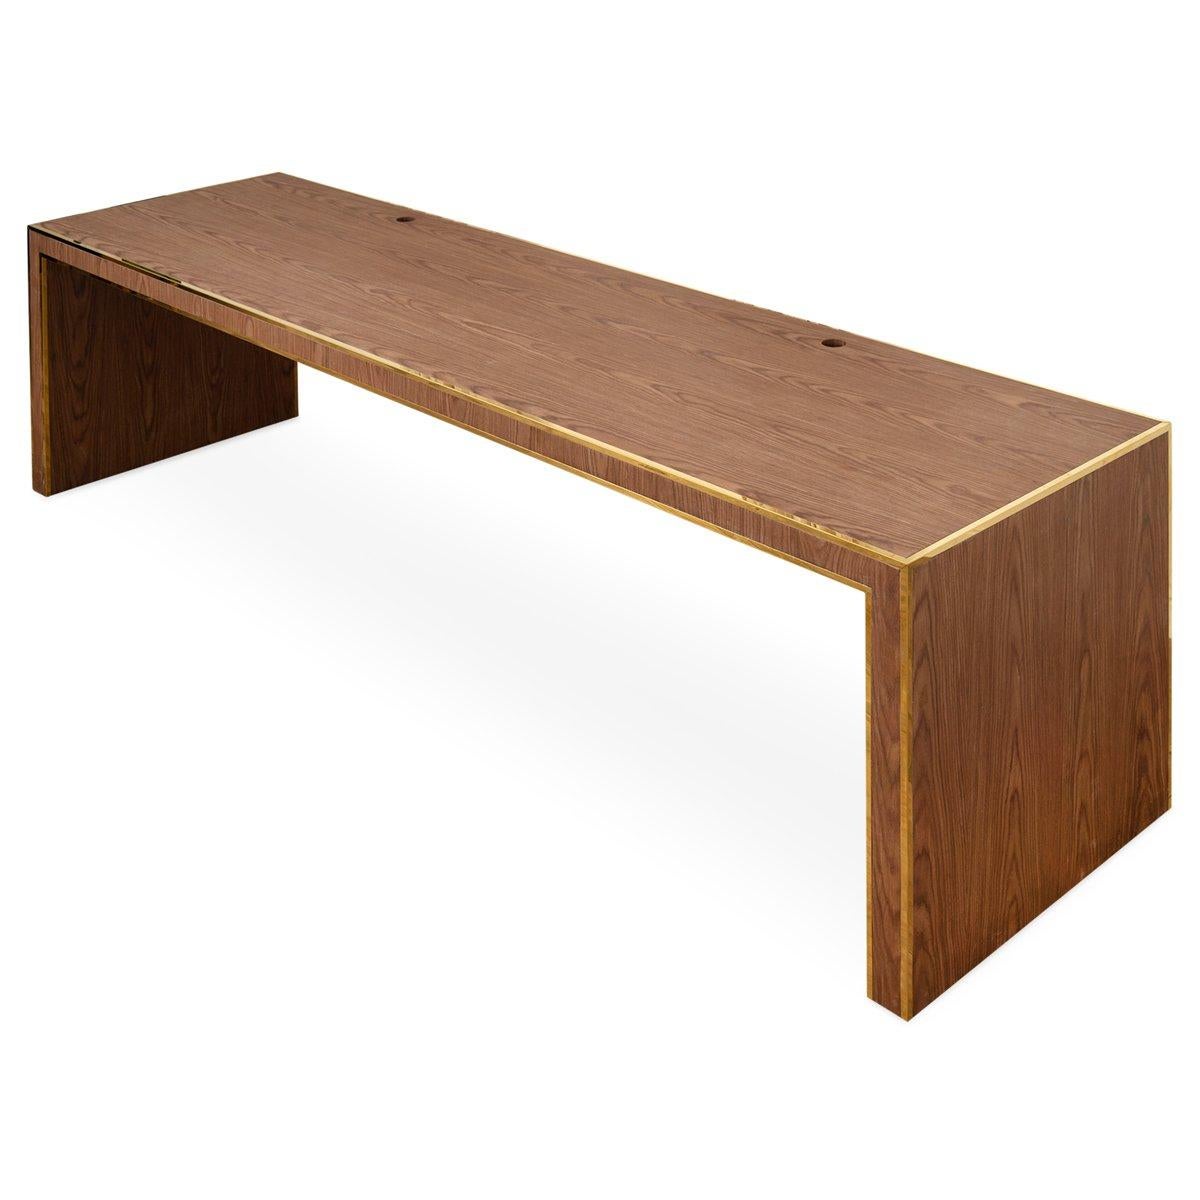 Make a statement in your office with this handsome oversized desk in natural walnut veneer with brass edge detailing. No drawers, but does include 2 media holes on desk top for cords.